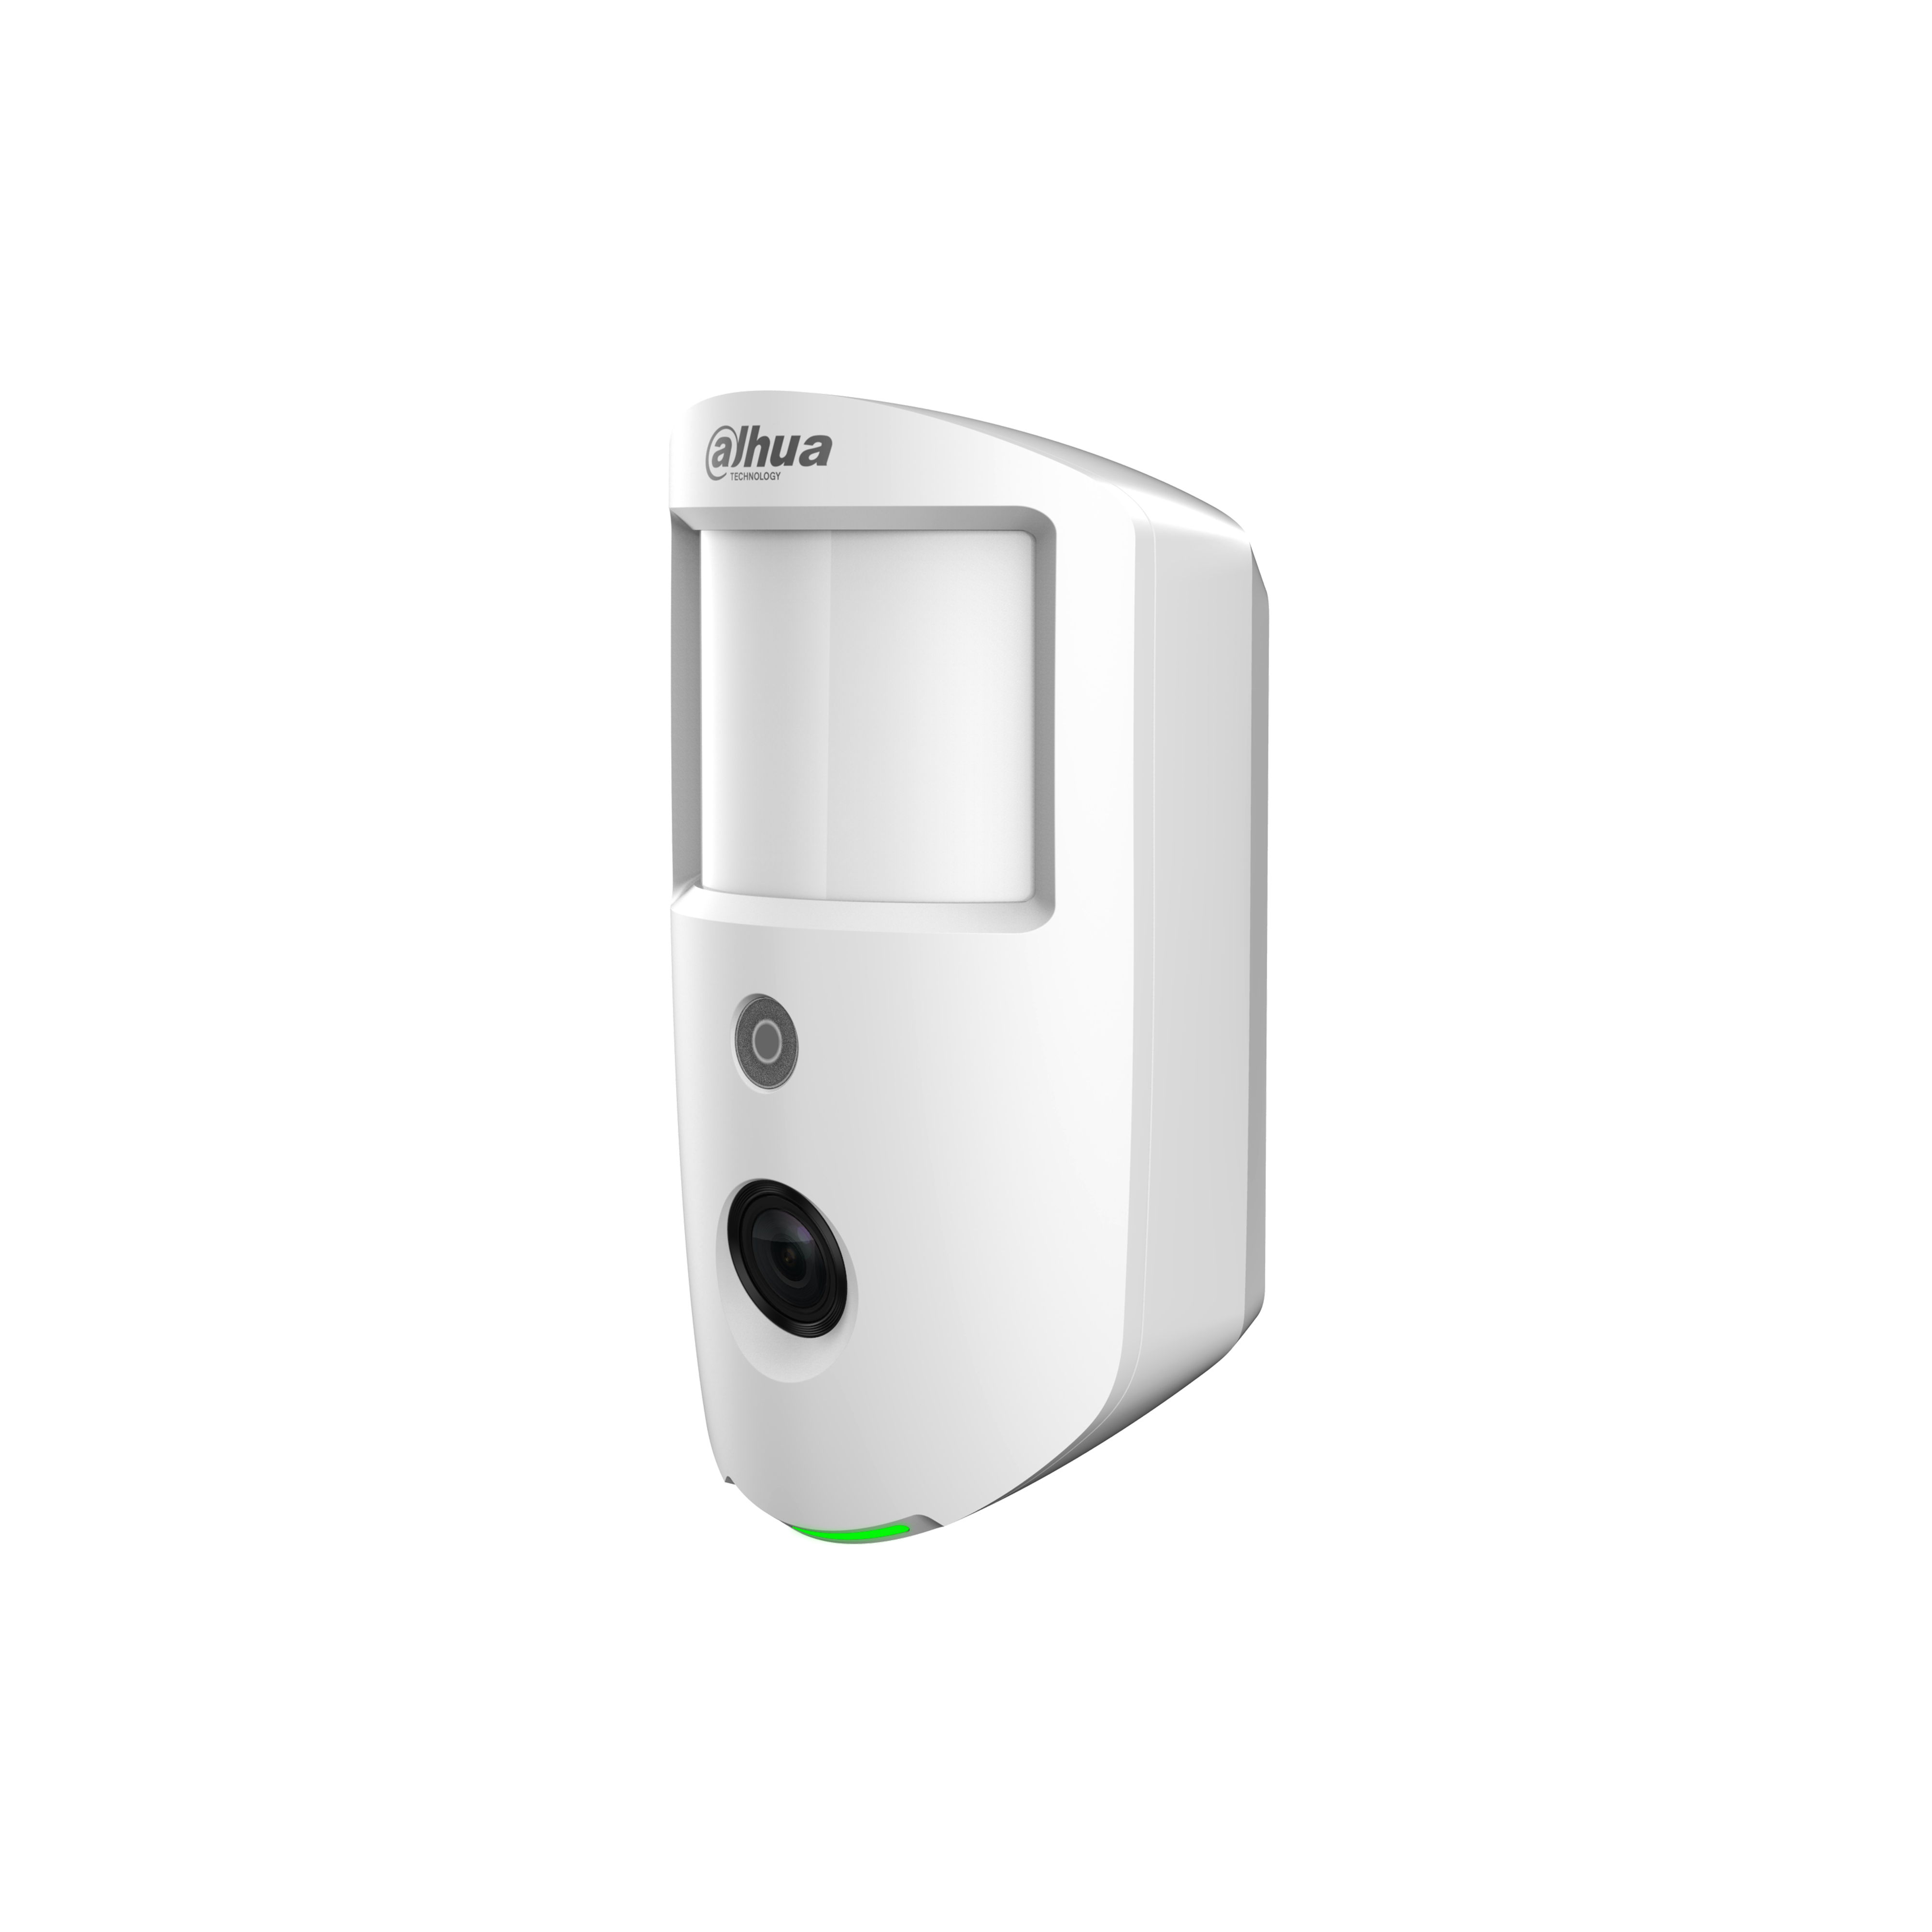 DAHUA WIRELESS PIR WITH CAMERA WHITE PET UP TO 18KG 12M DETECTION AREA WALL MOUNT 2.2M MOUNT HEIGHT 433MHz 3xCR123A BATT (9V)